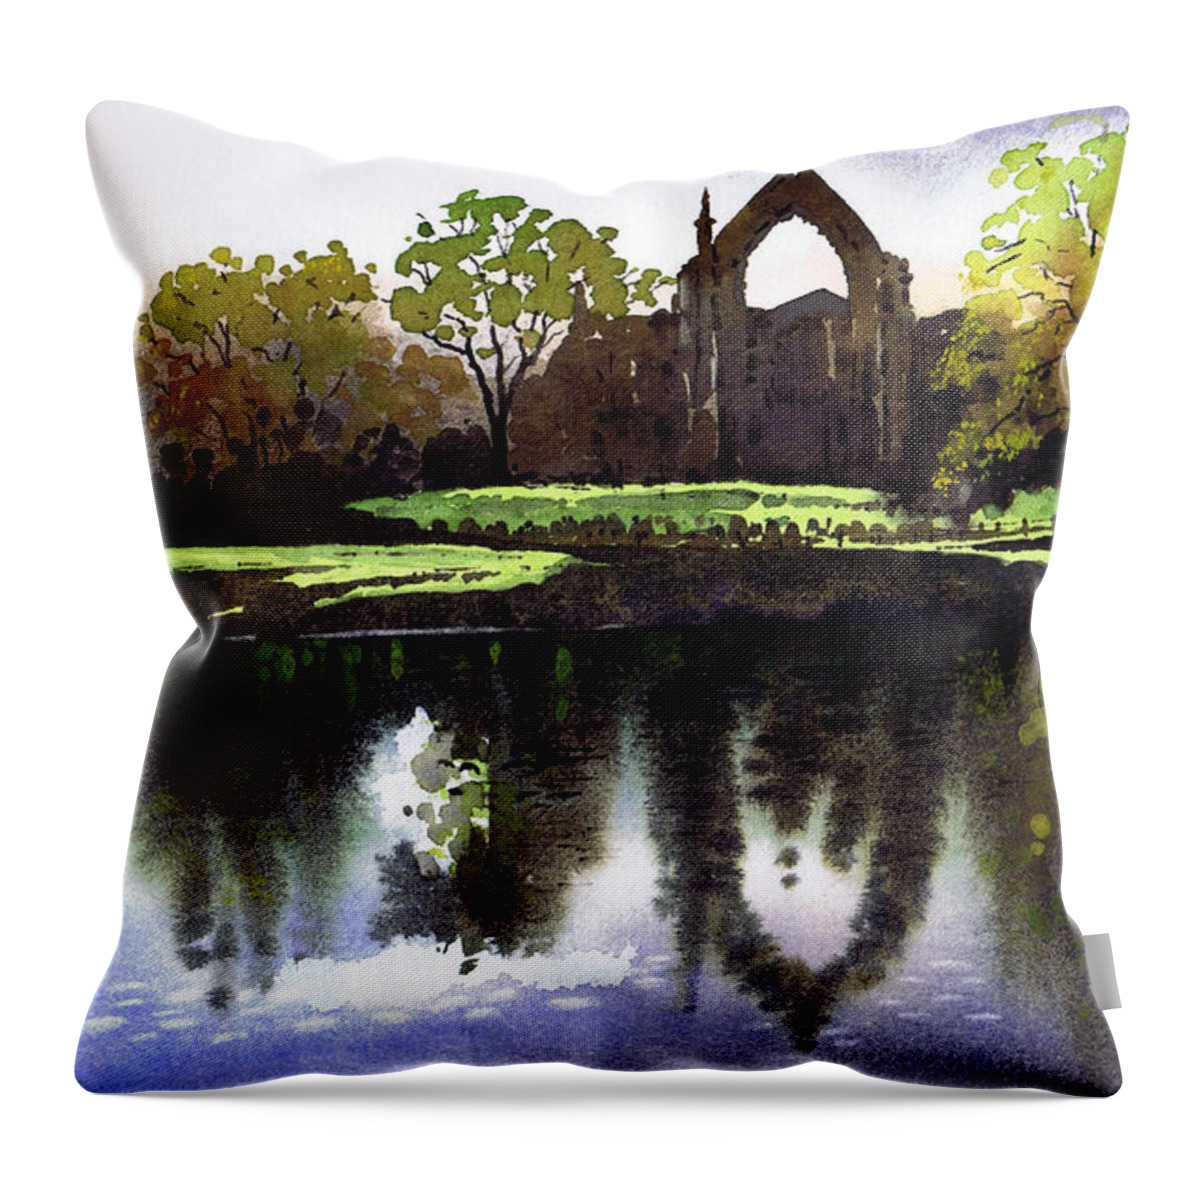 Watercolour Lanndscape Throw Pillow featuring the painting Bolton Abbey by Paul Dene Marlor